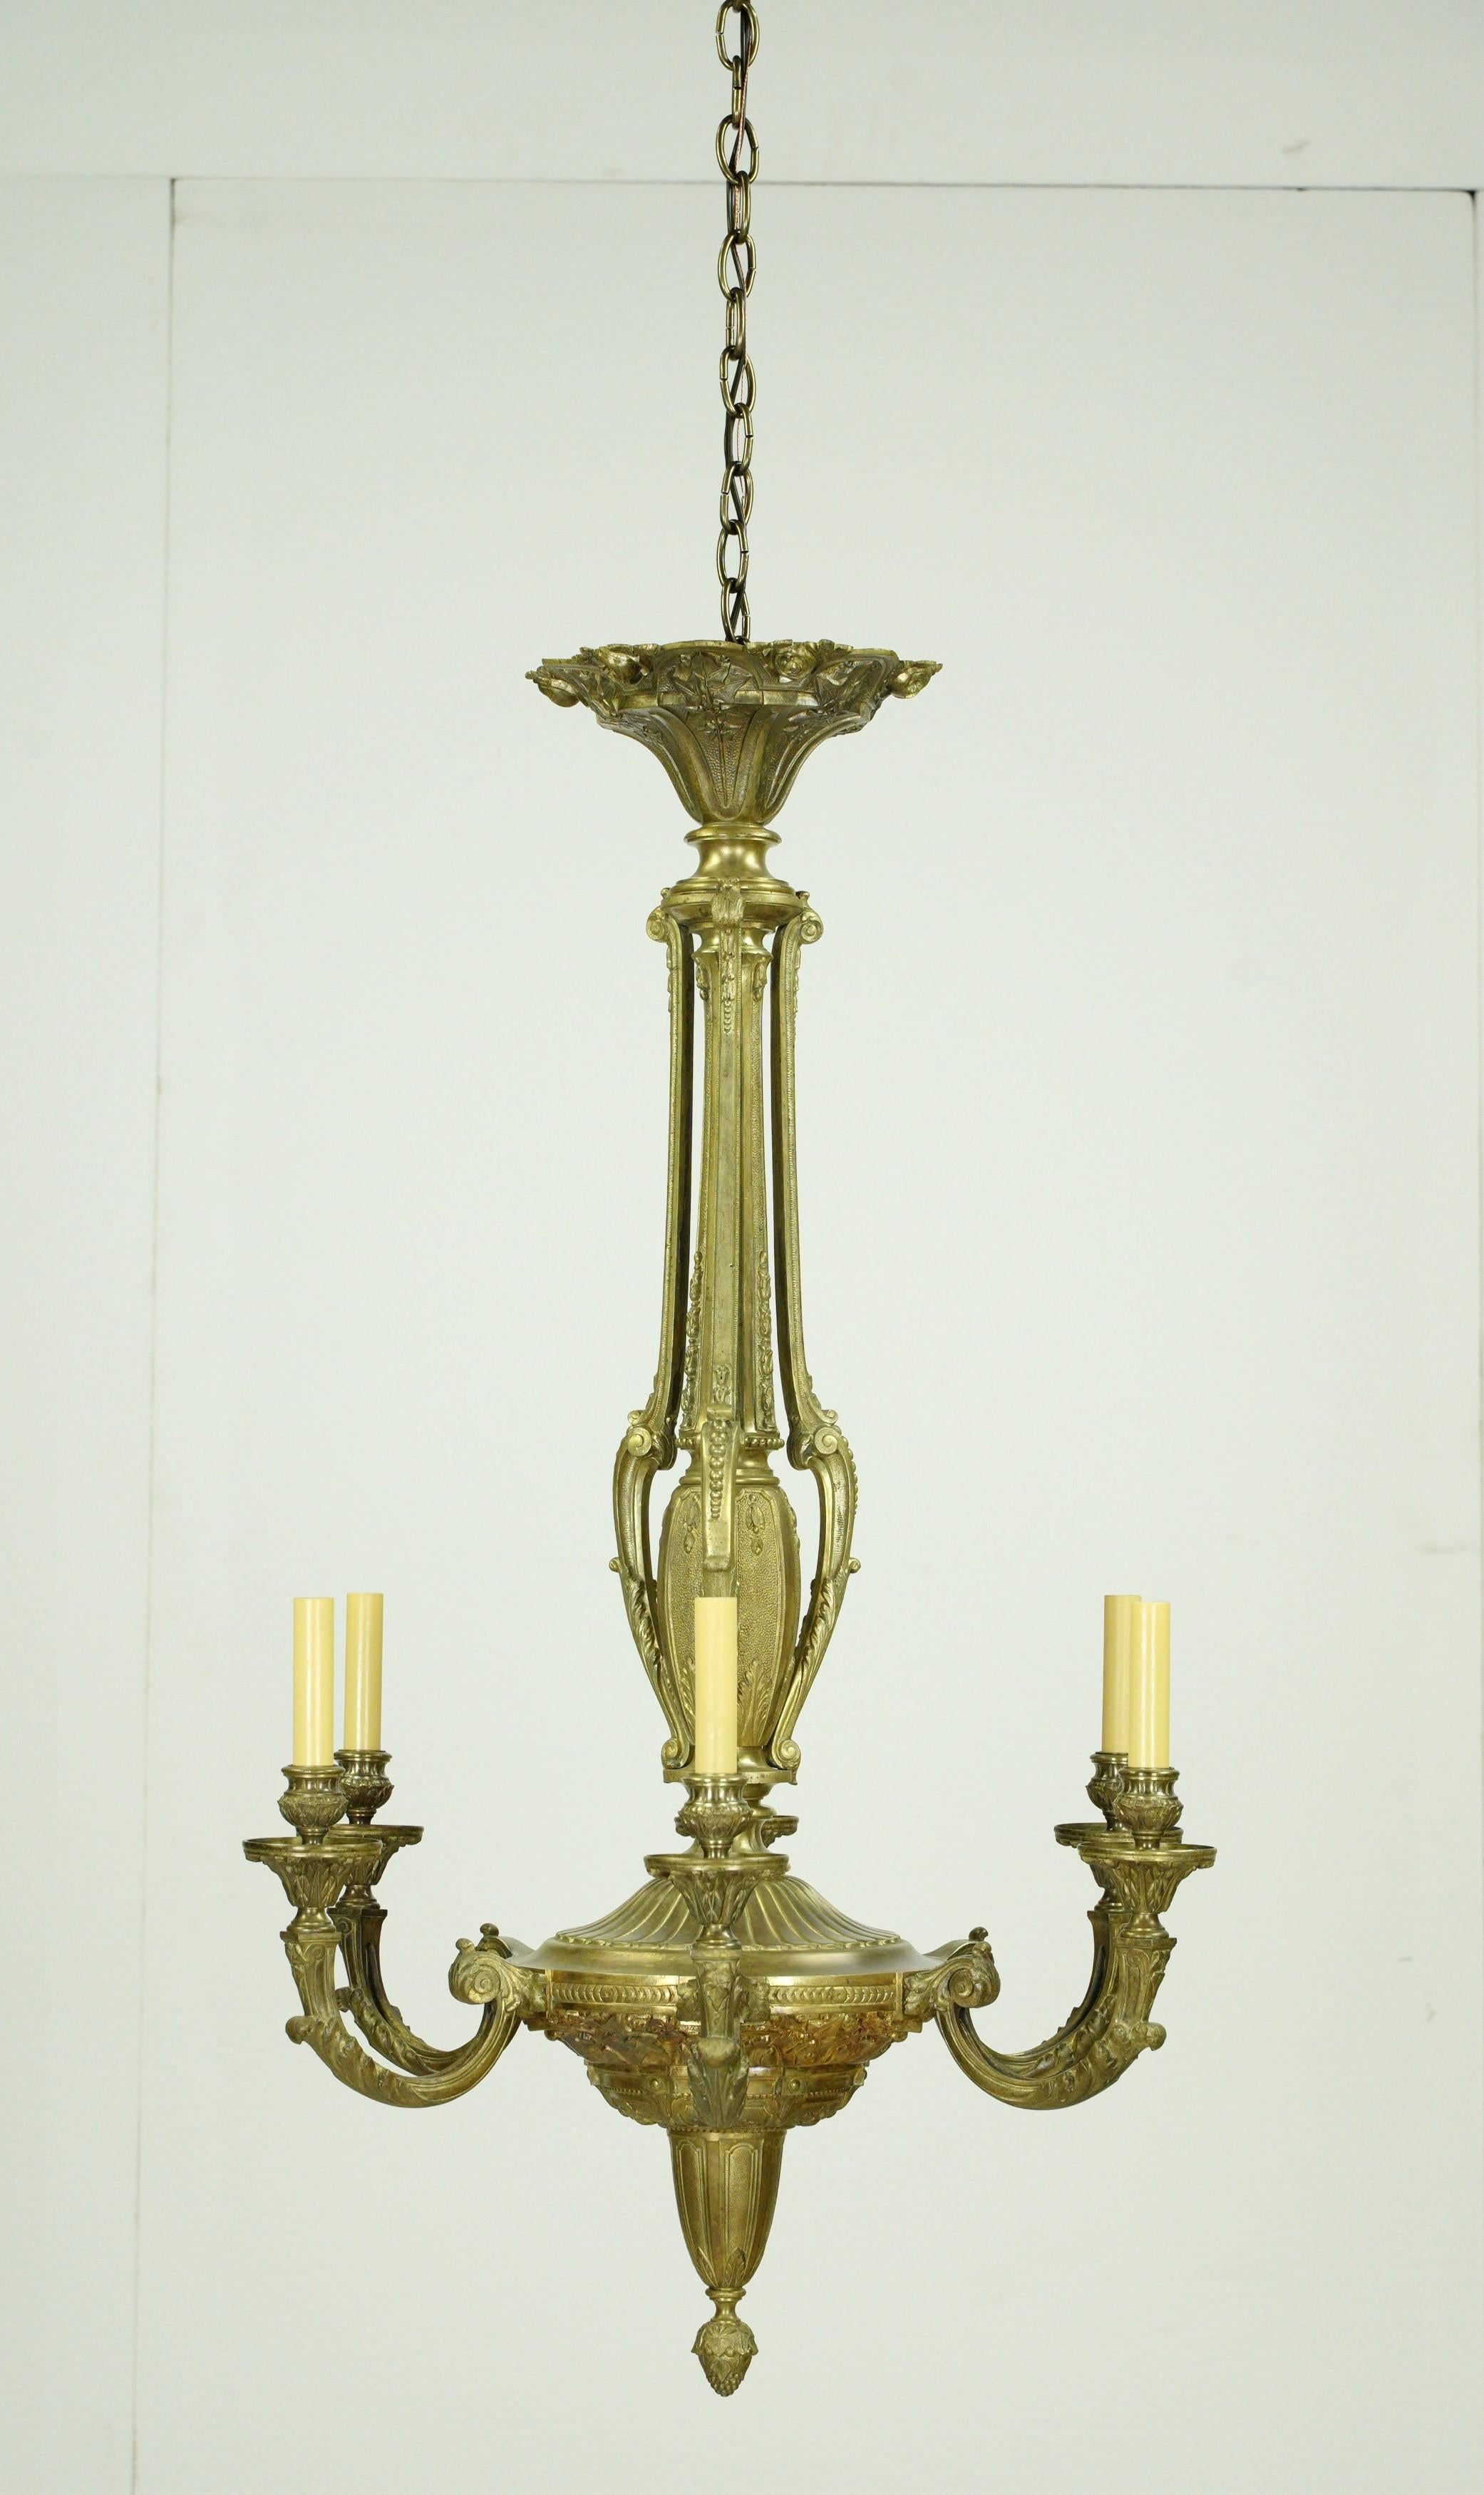 Restored Antique French Bronze Ornate 6 Arm Chandelier In Good Condition For Sale In New York, NY